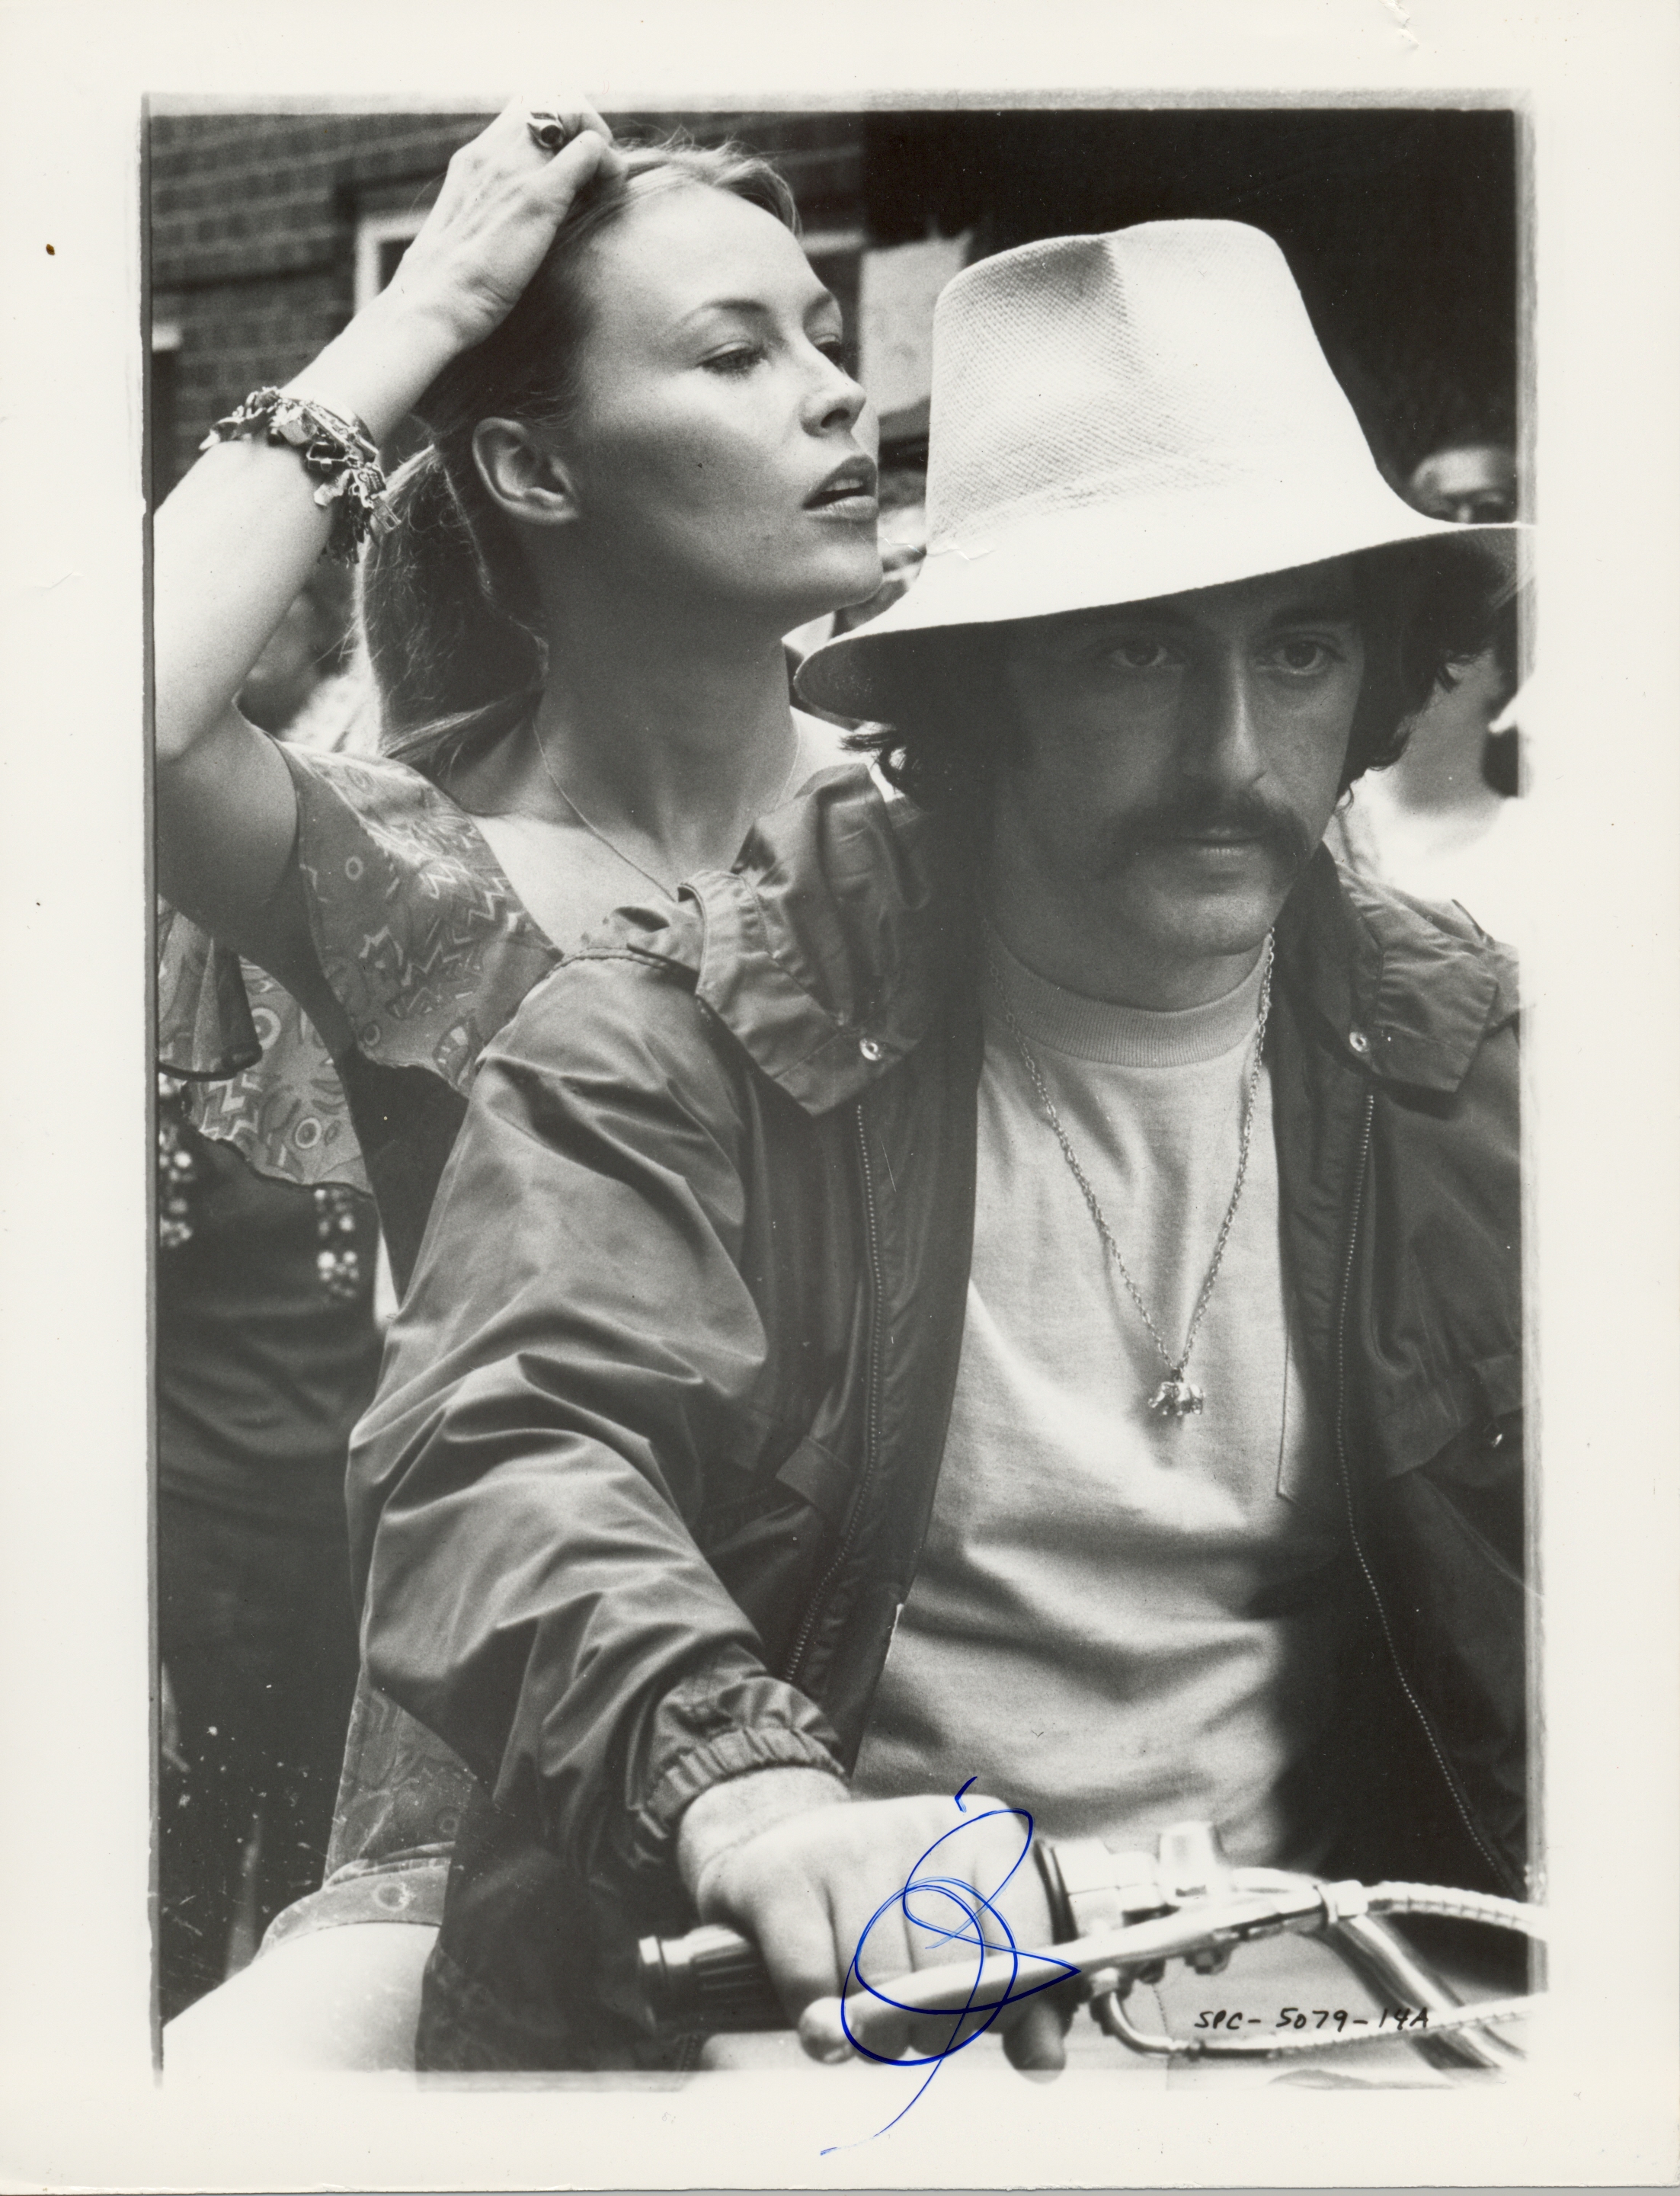 PACINO AL: (1940- ) American Actor, Academy Award winner. Signed 8 x 10 photograph by Pacino, the